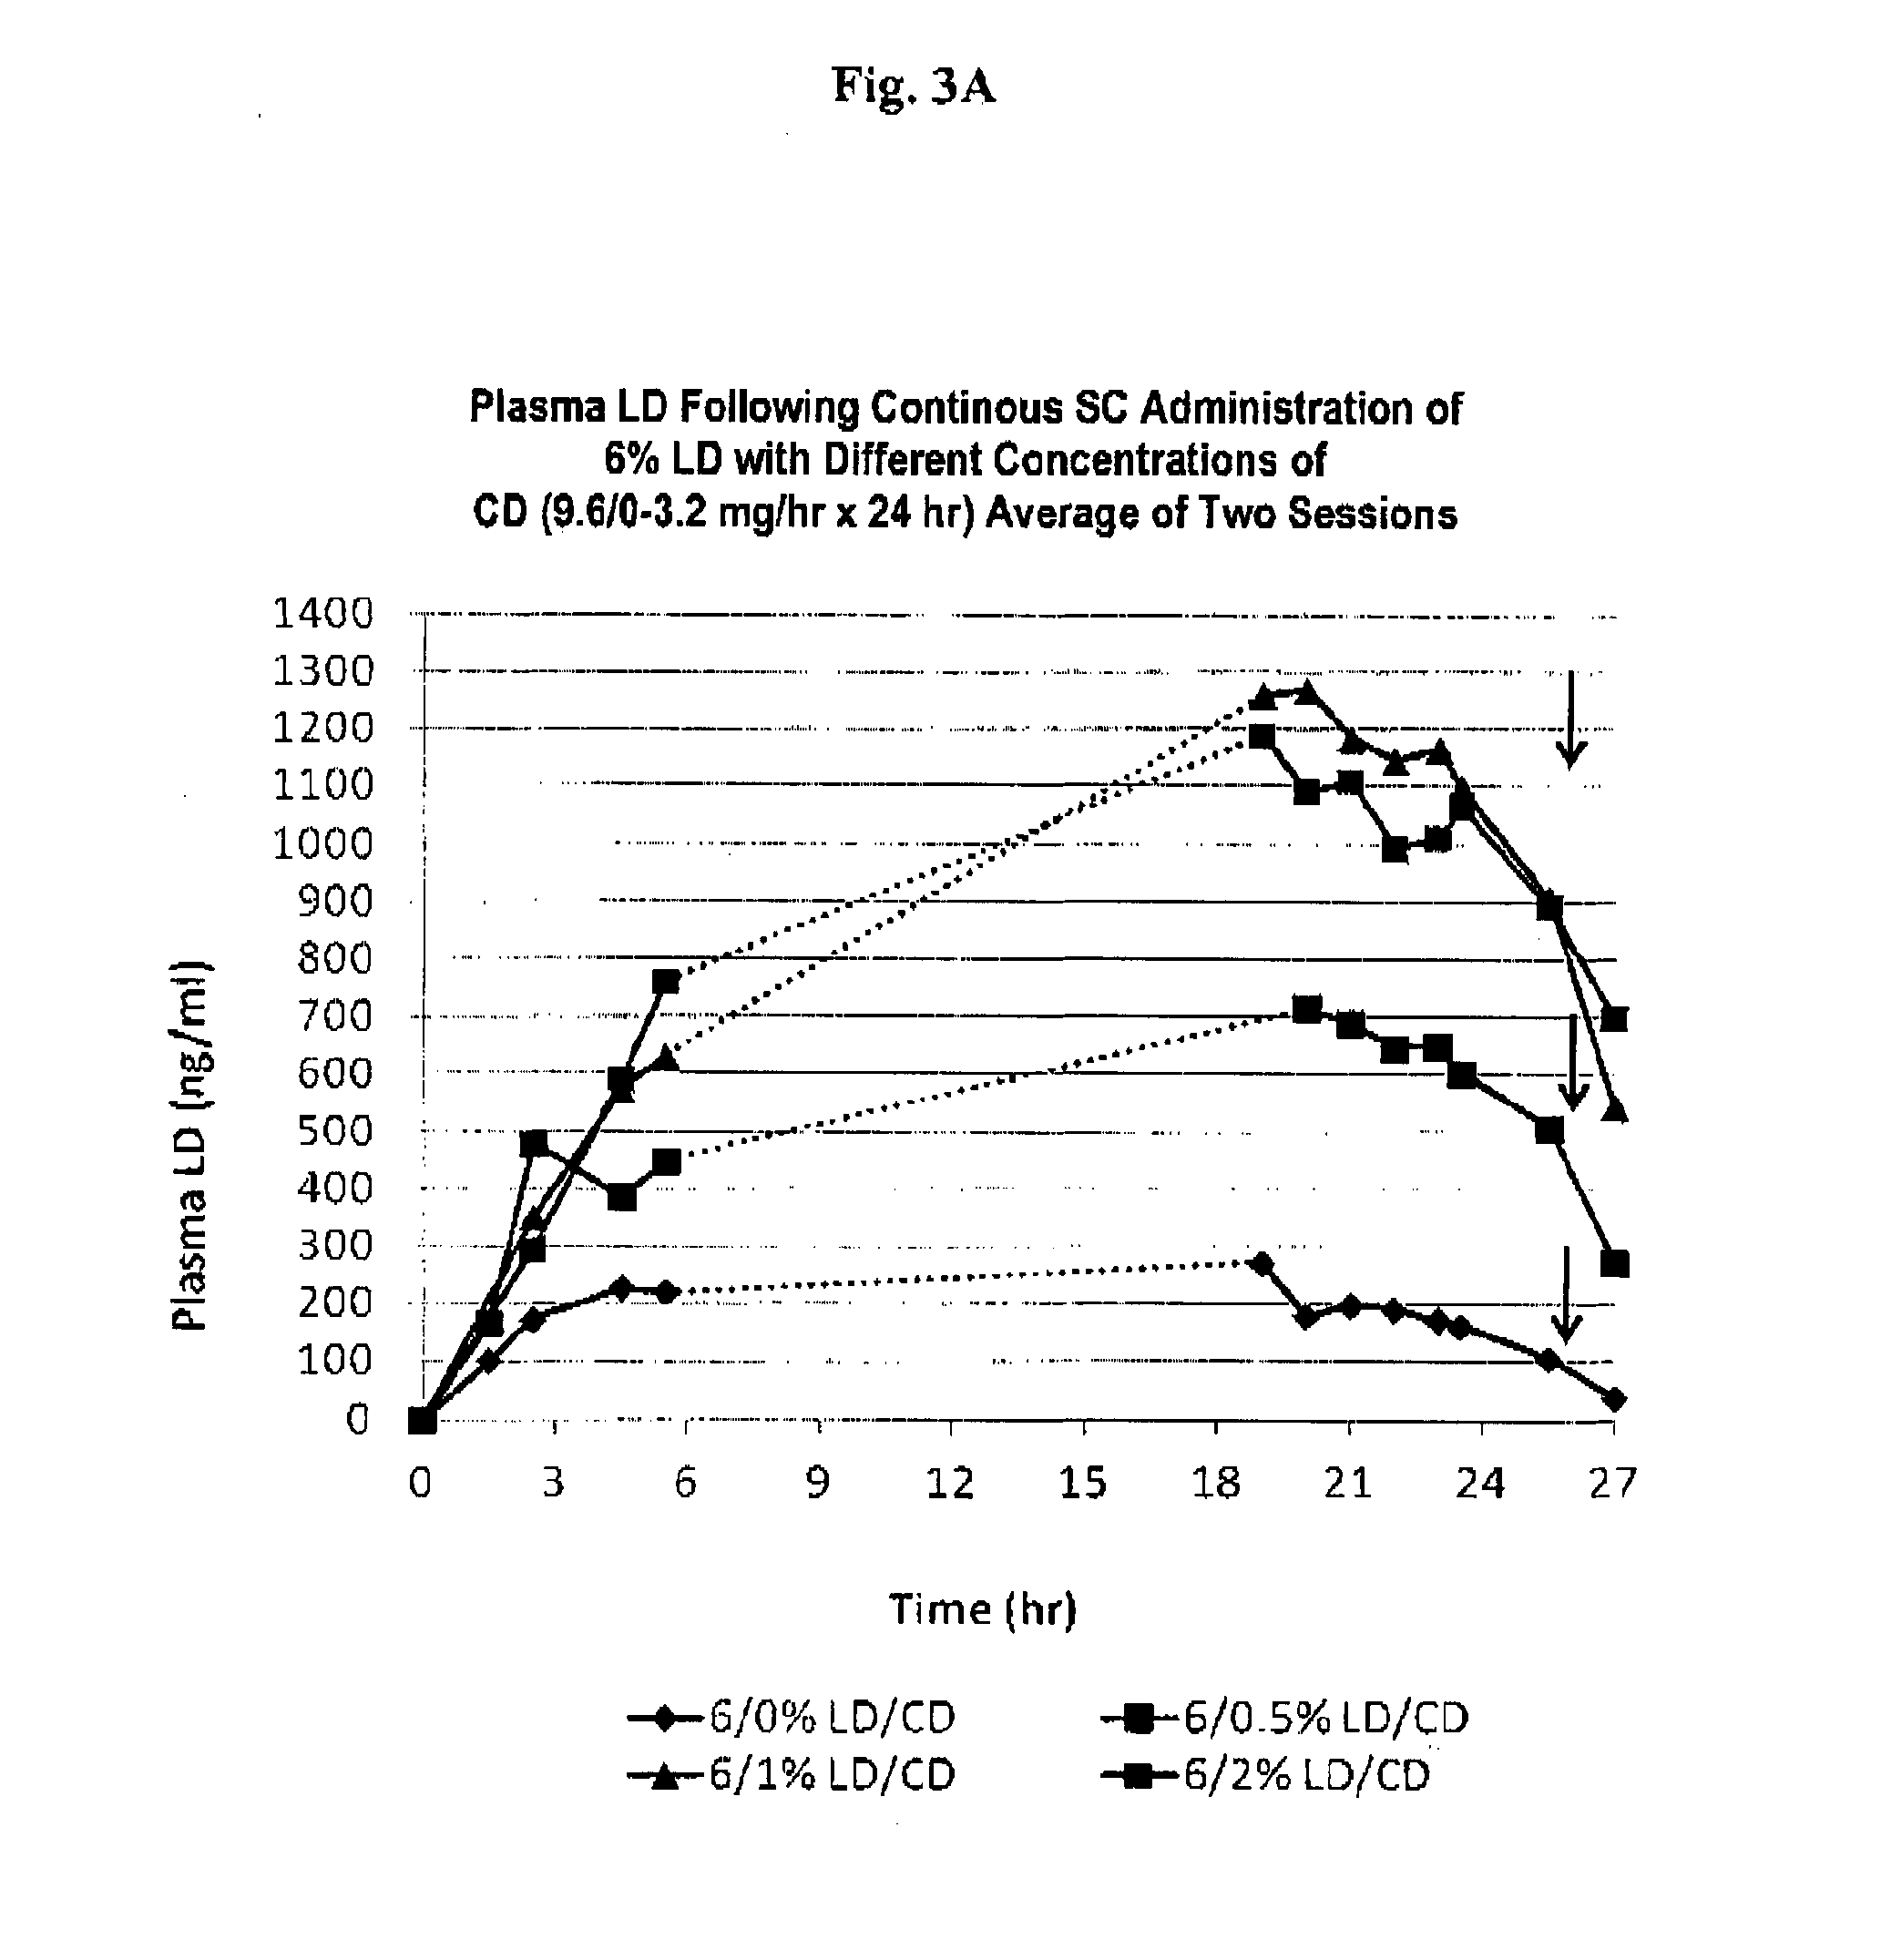 Continuous Administration of L-Dopa, Dopa Decarboxylase Inhibitors, Catechol-O-Methyl Transferase Inhibitors and Compositions for Same